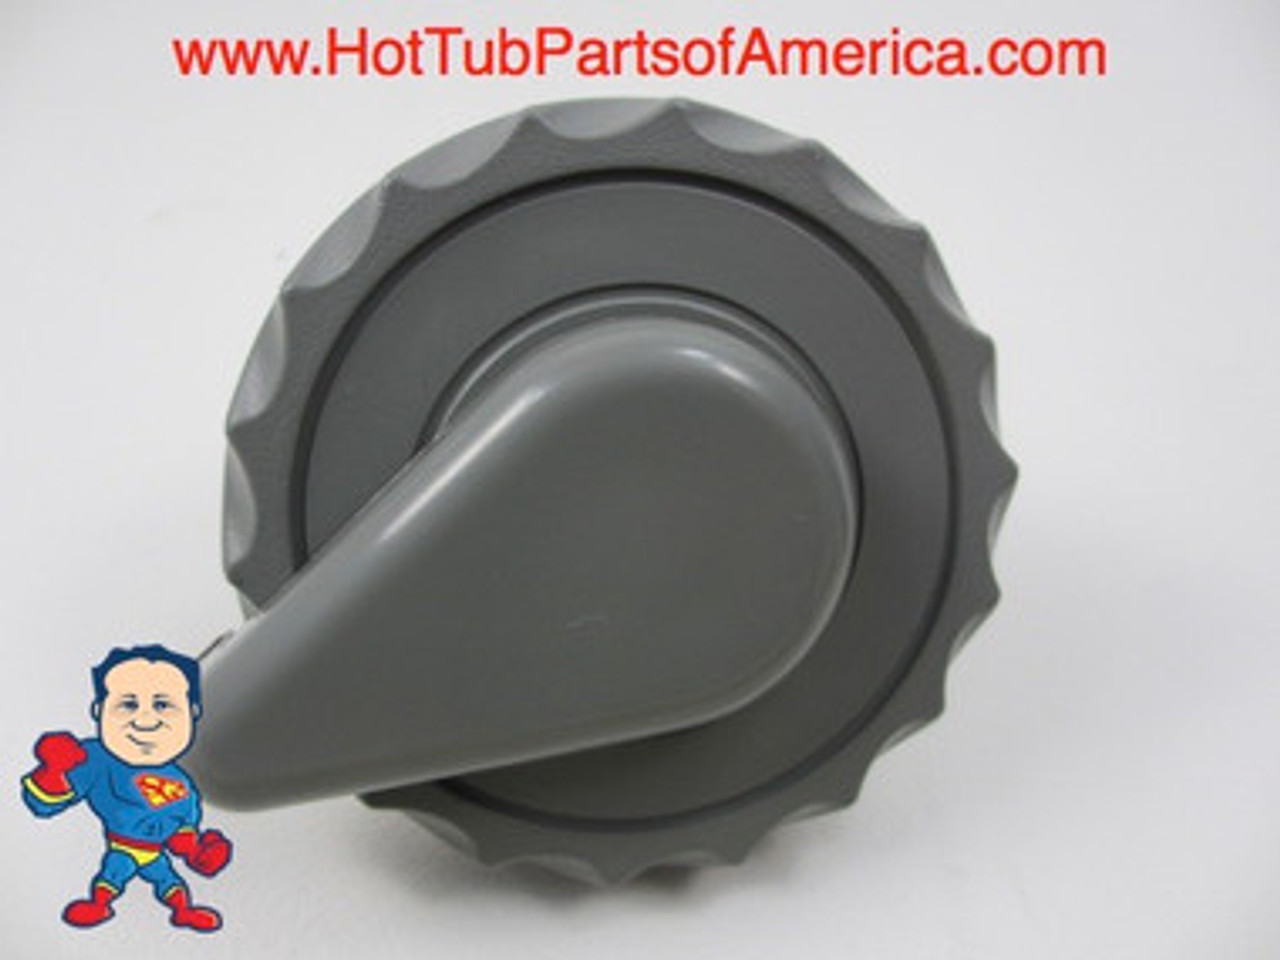 Air Control Valve 18 Scallop Gray 1" Spa Hot Tub Universal Waterway Video How To